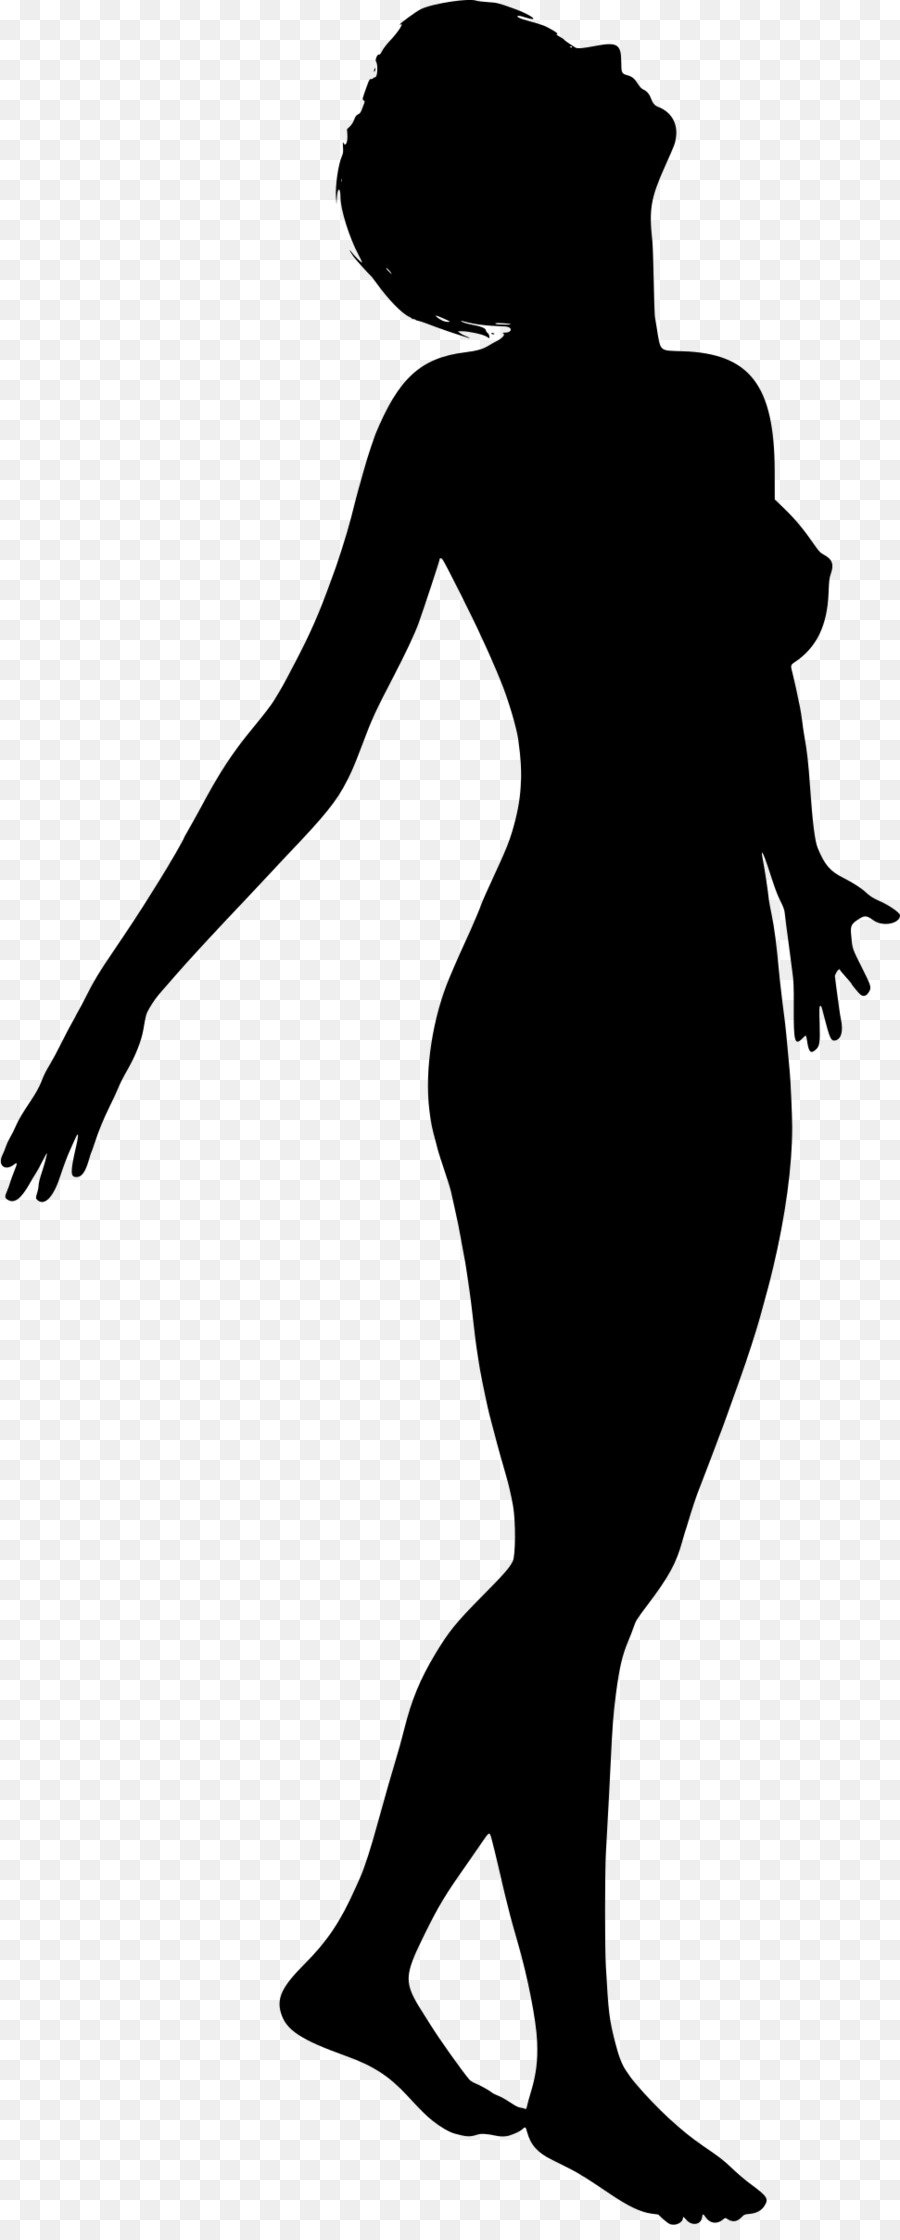 Silhouette Woman Cartoon Clip art - Silhouette png download - 800*416 ...